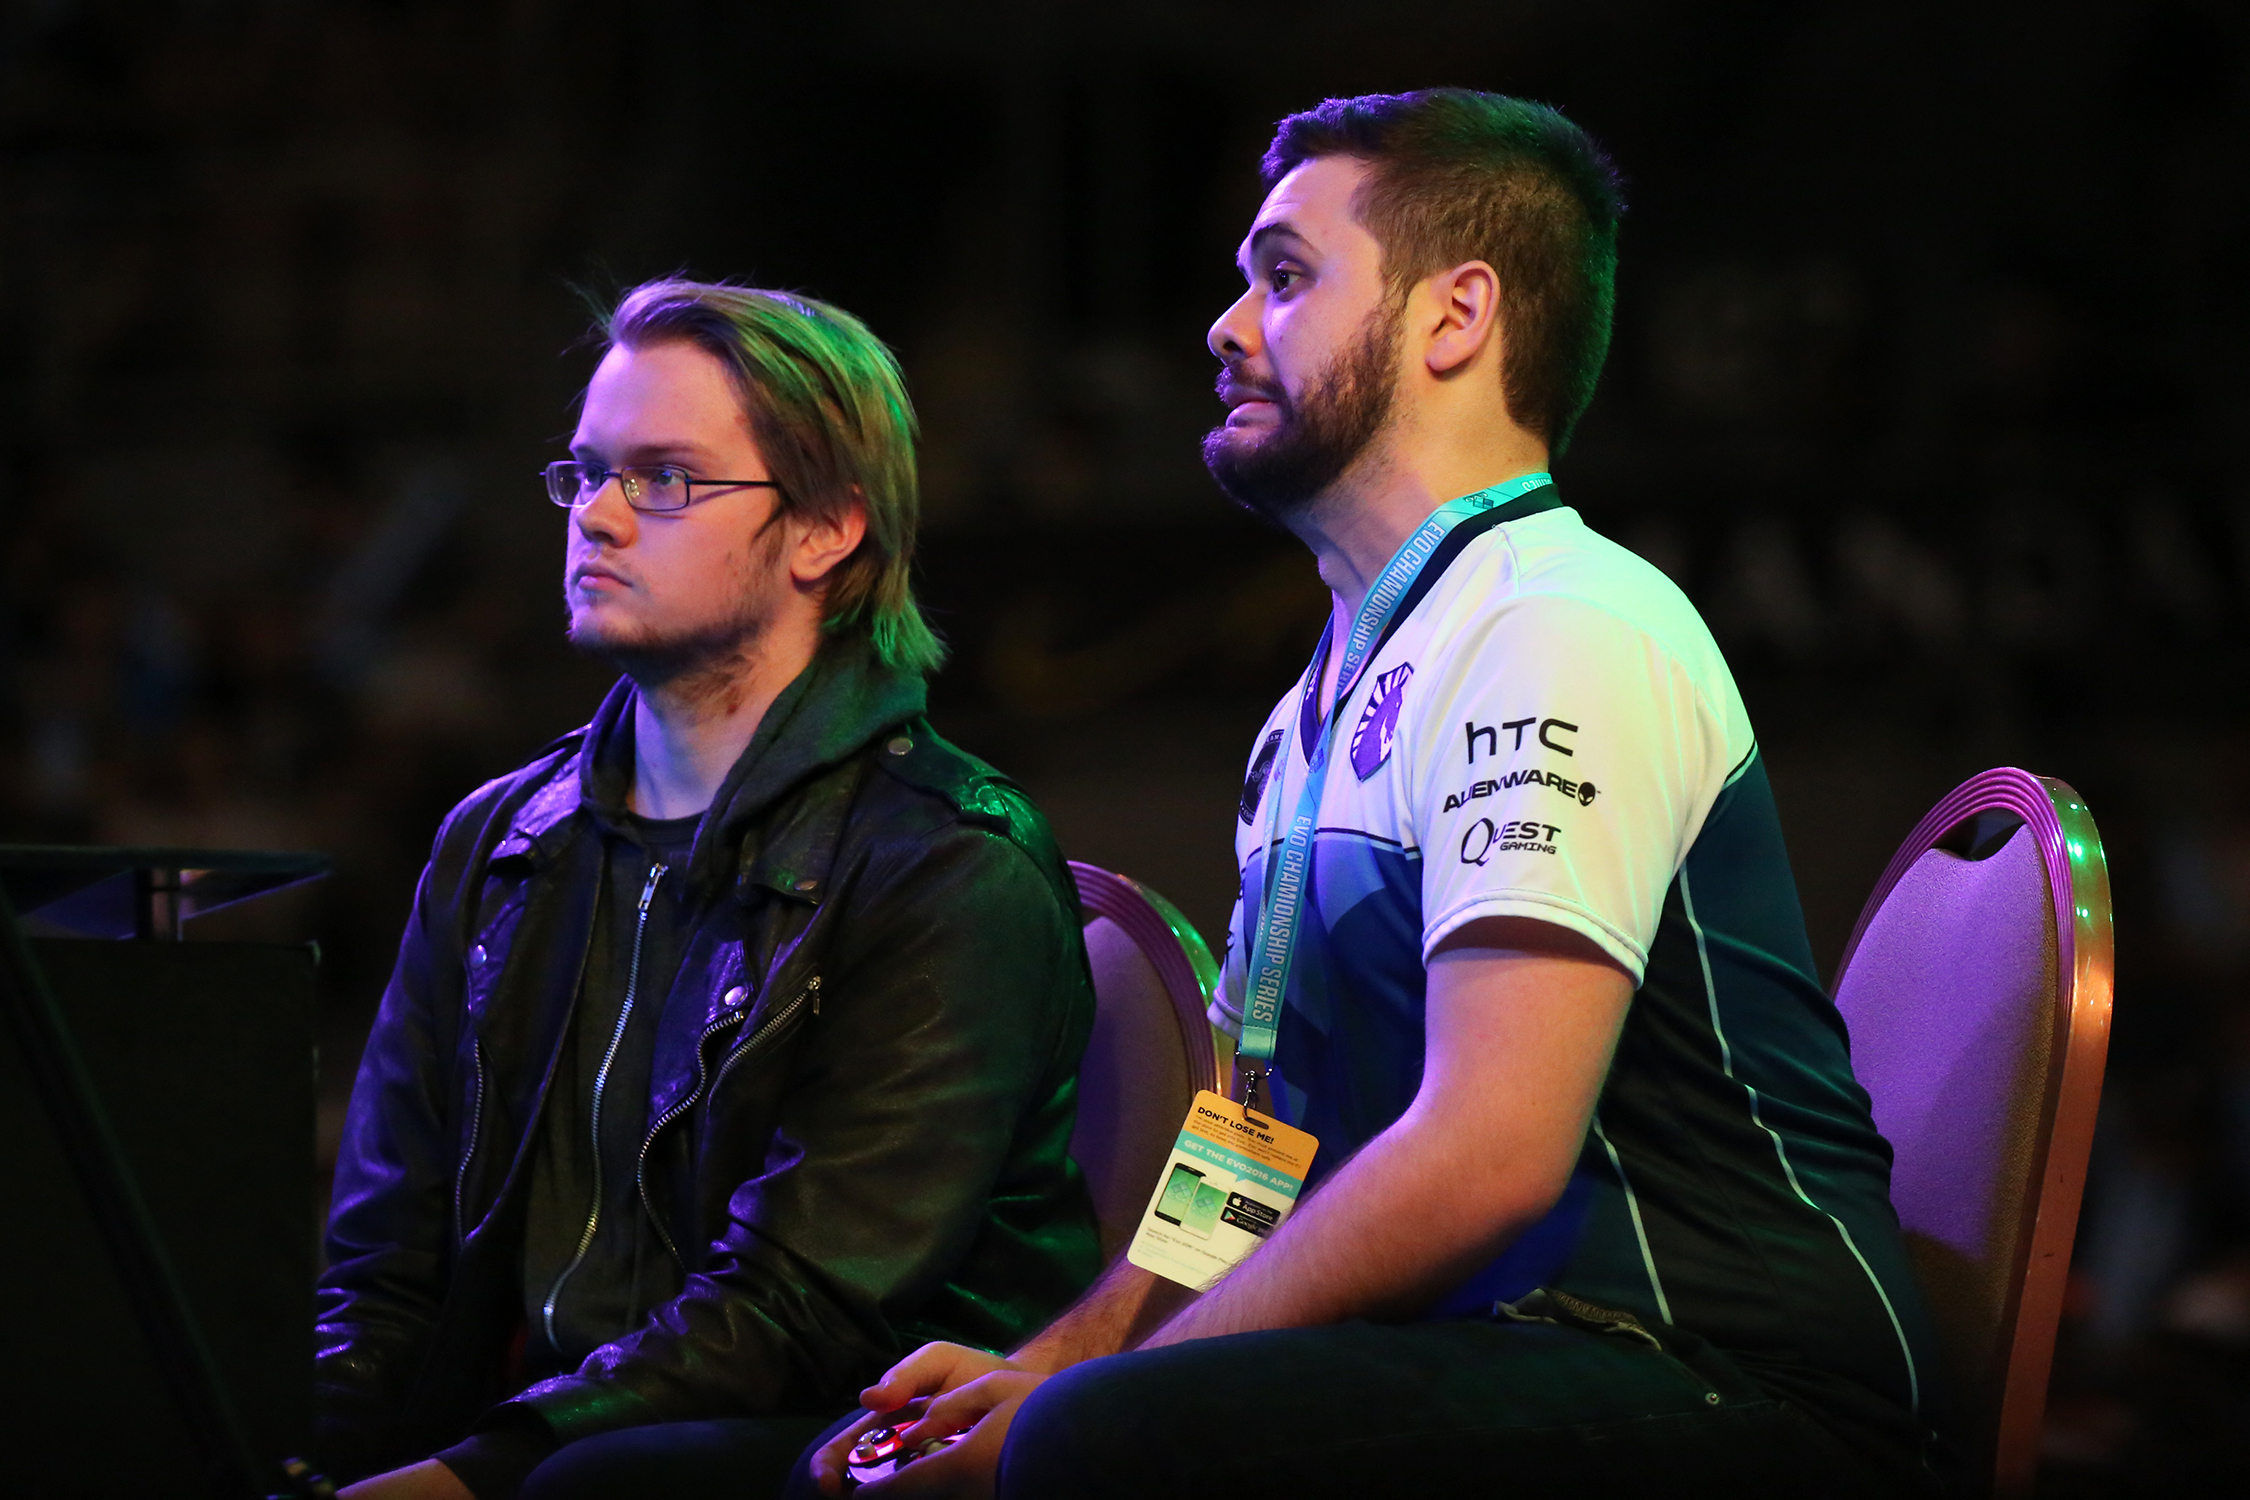  Juan “Hunbgrybox” Debiedma reacts as he works to reset the brackets in his Super Smash Bros. Melee grand finals matchup against Adam “Armada” Lindgren. © Gail Fisher for ESPN    